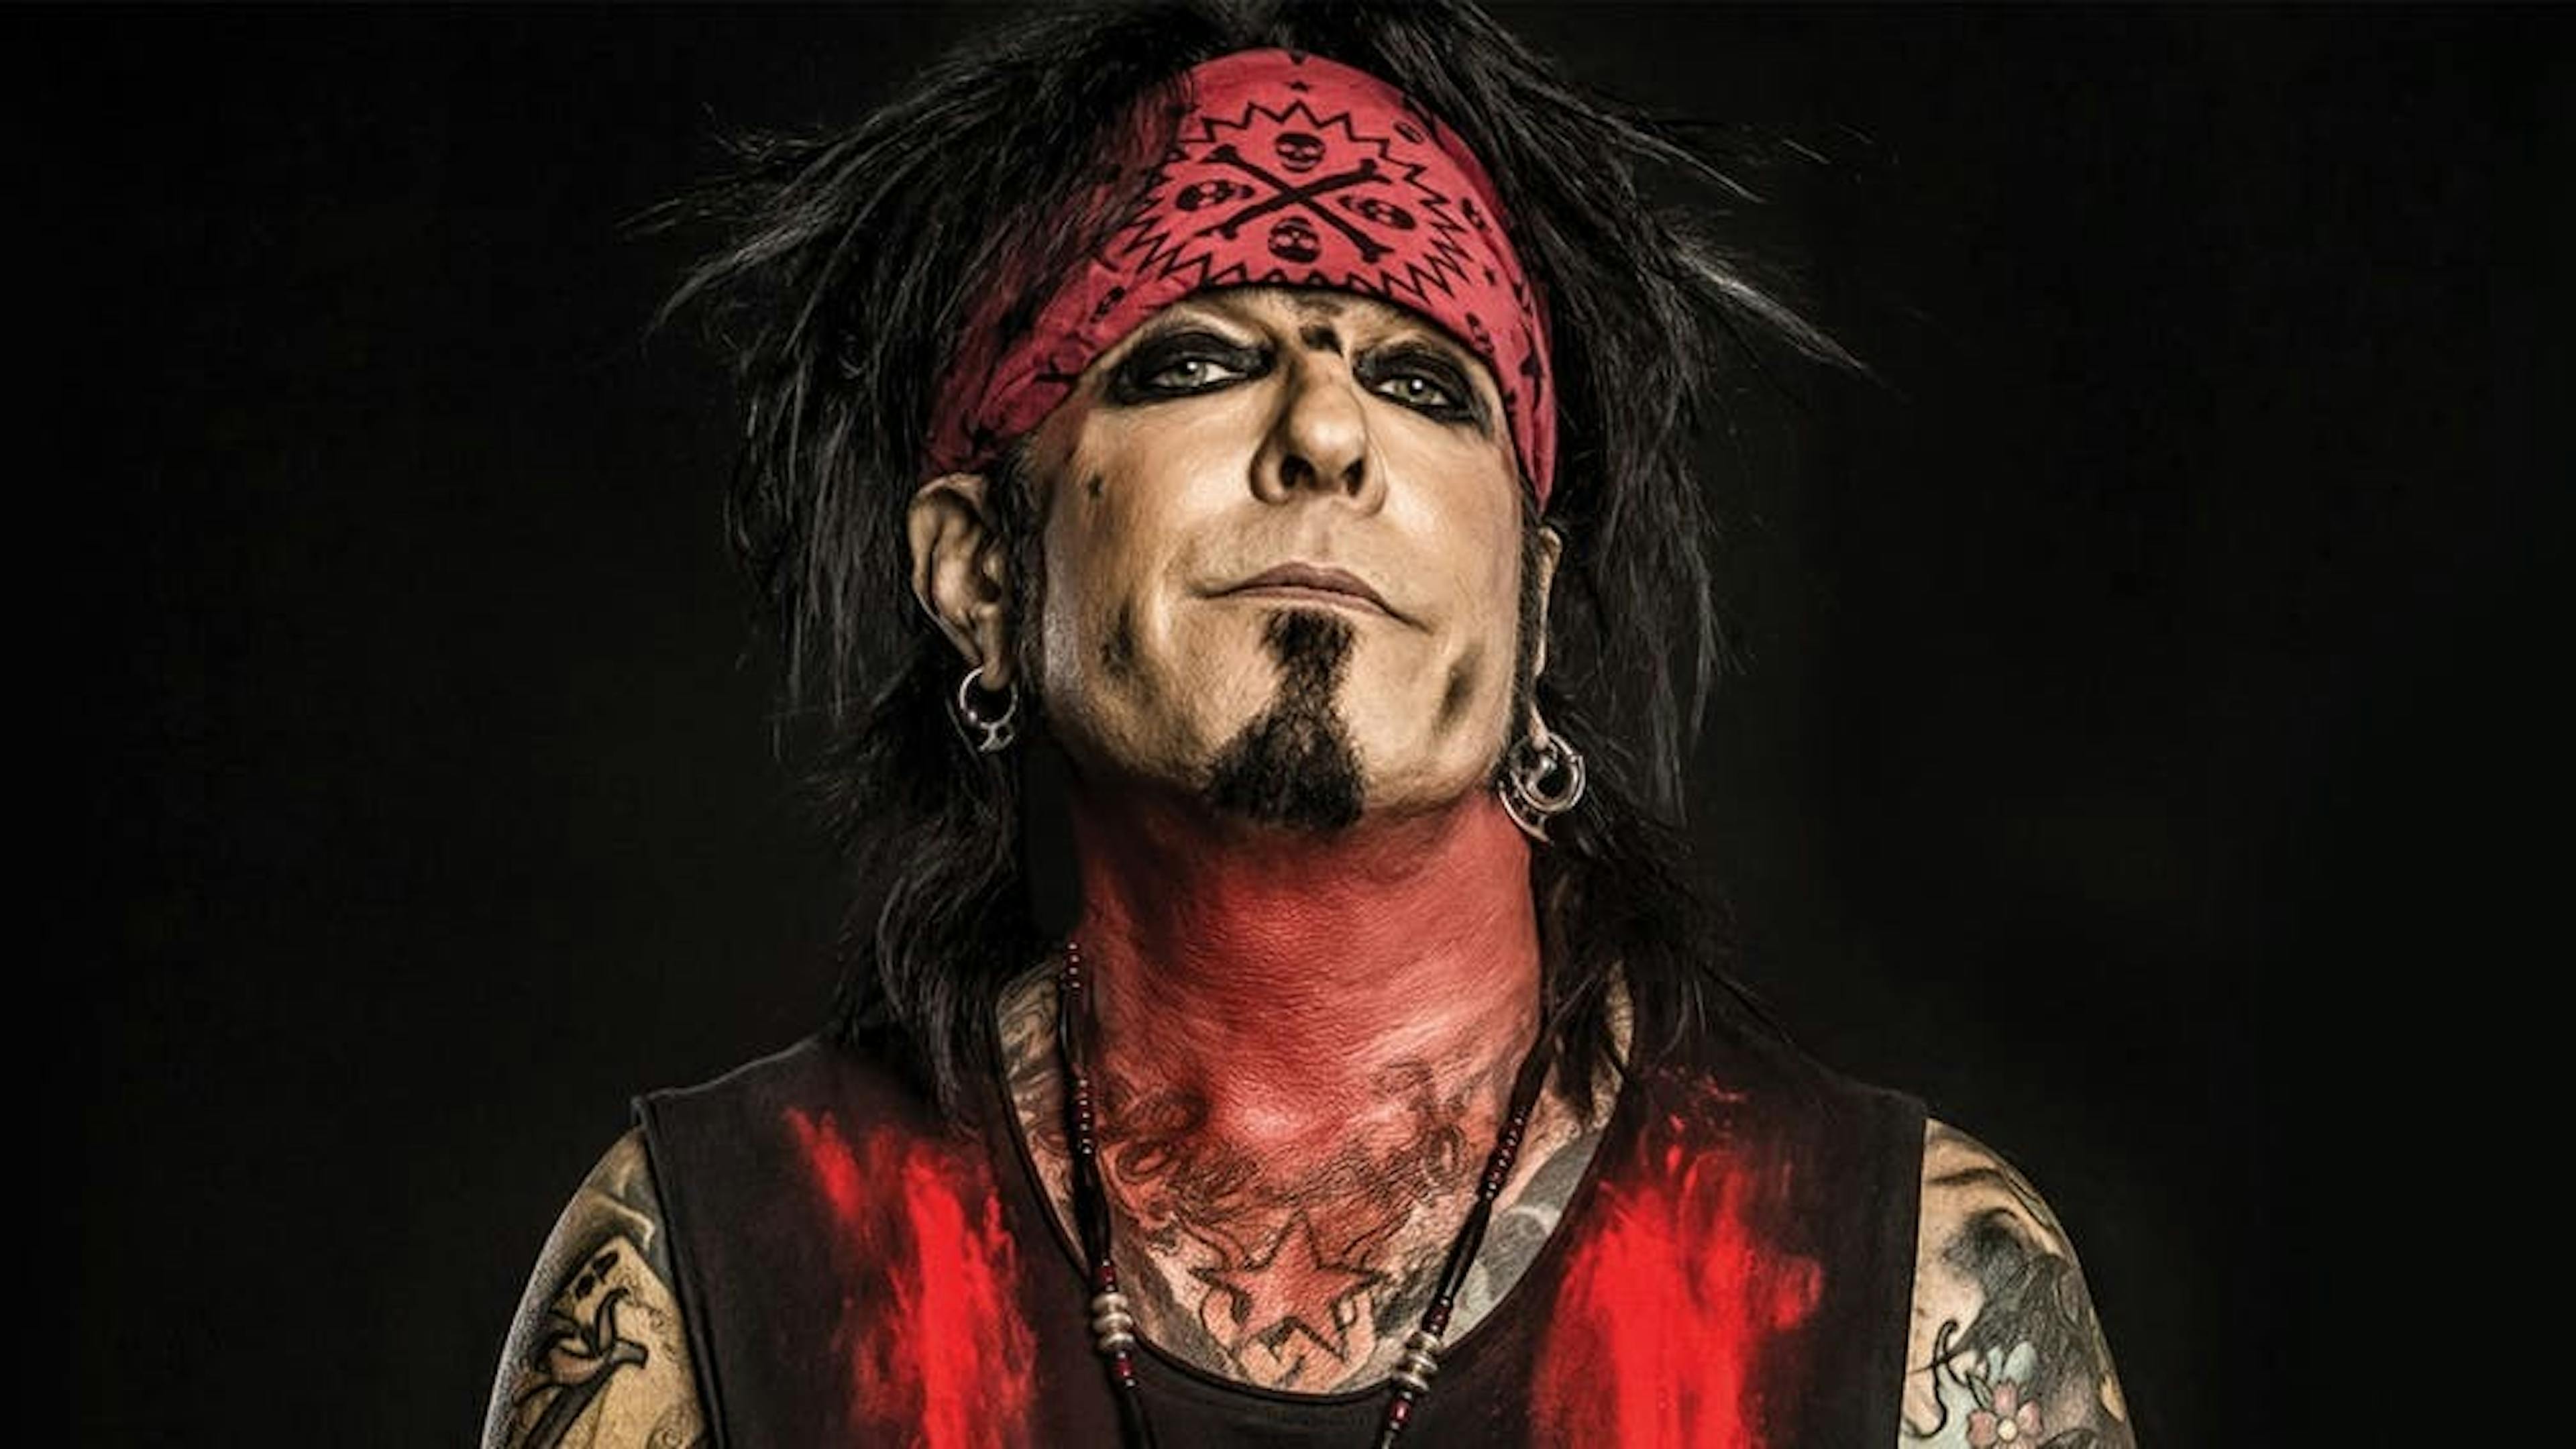 Nikki Sixx: “The Dirt was warts’n’all… I don’t know how we survived”